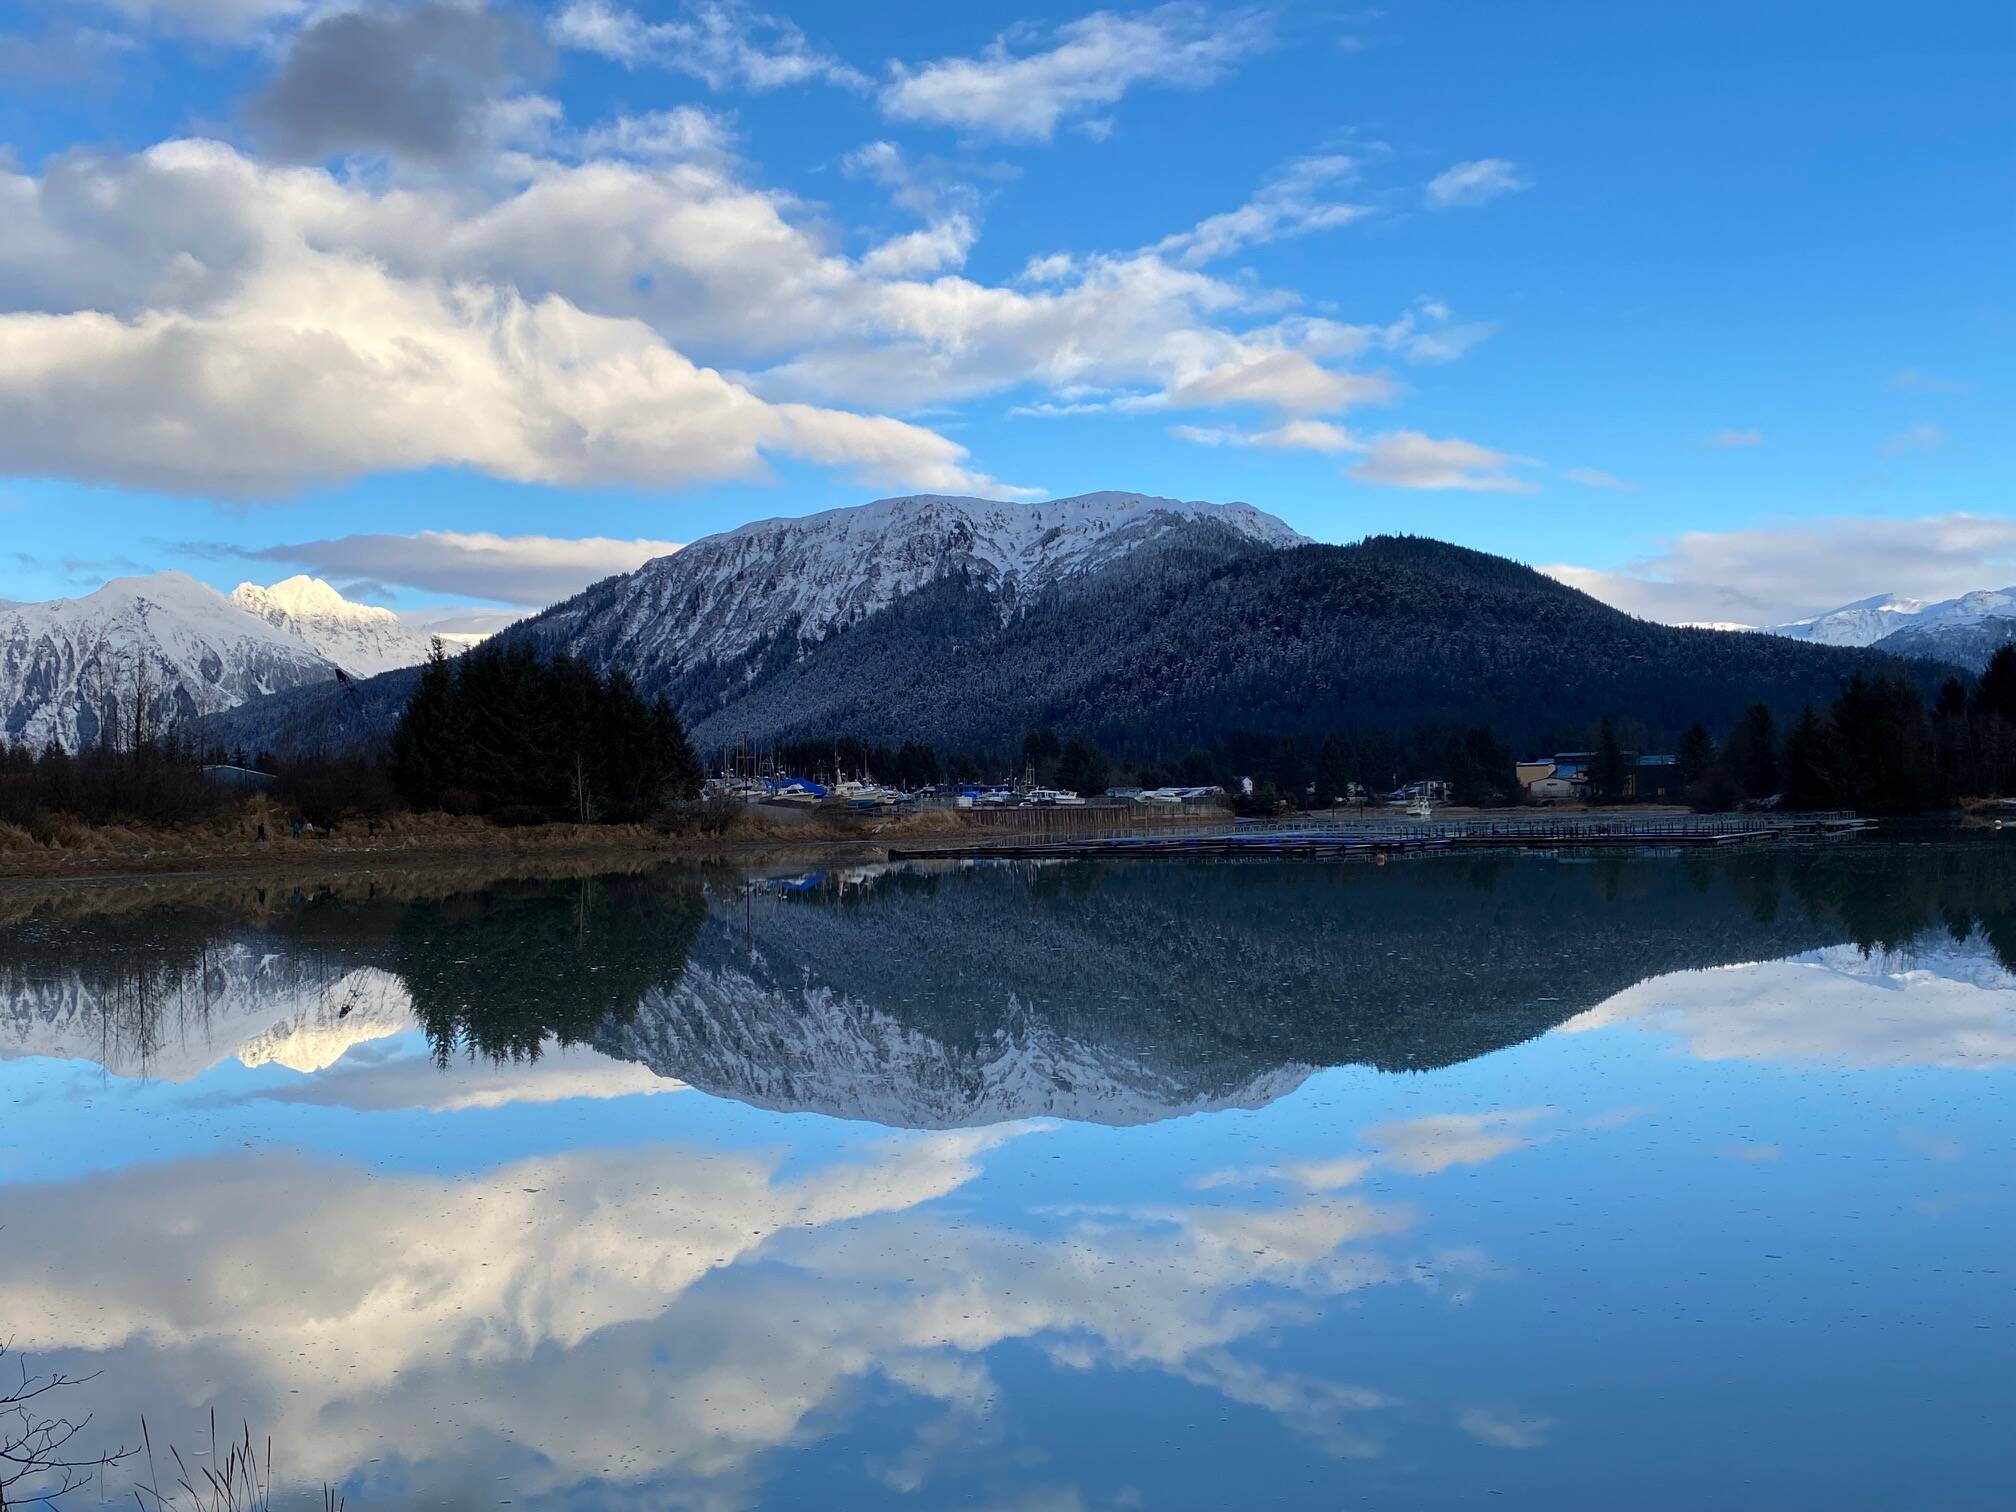 Mountain reflections are seen from the Mendenhall Wetlands. (Courtesy Photo / Denise Carroll)